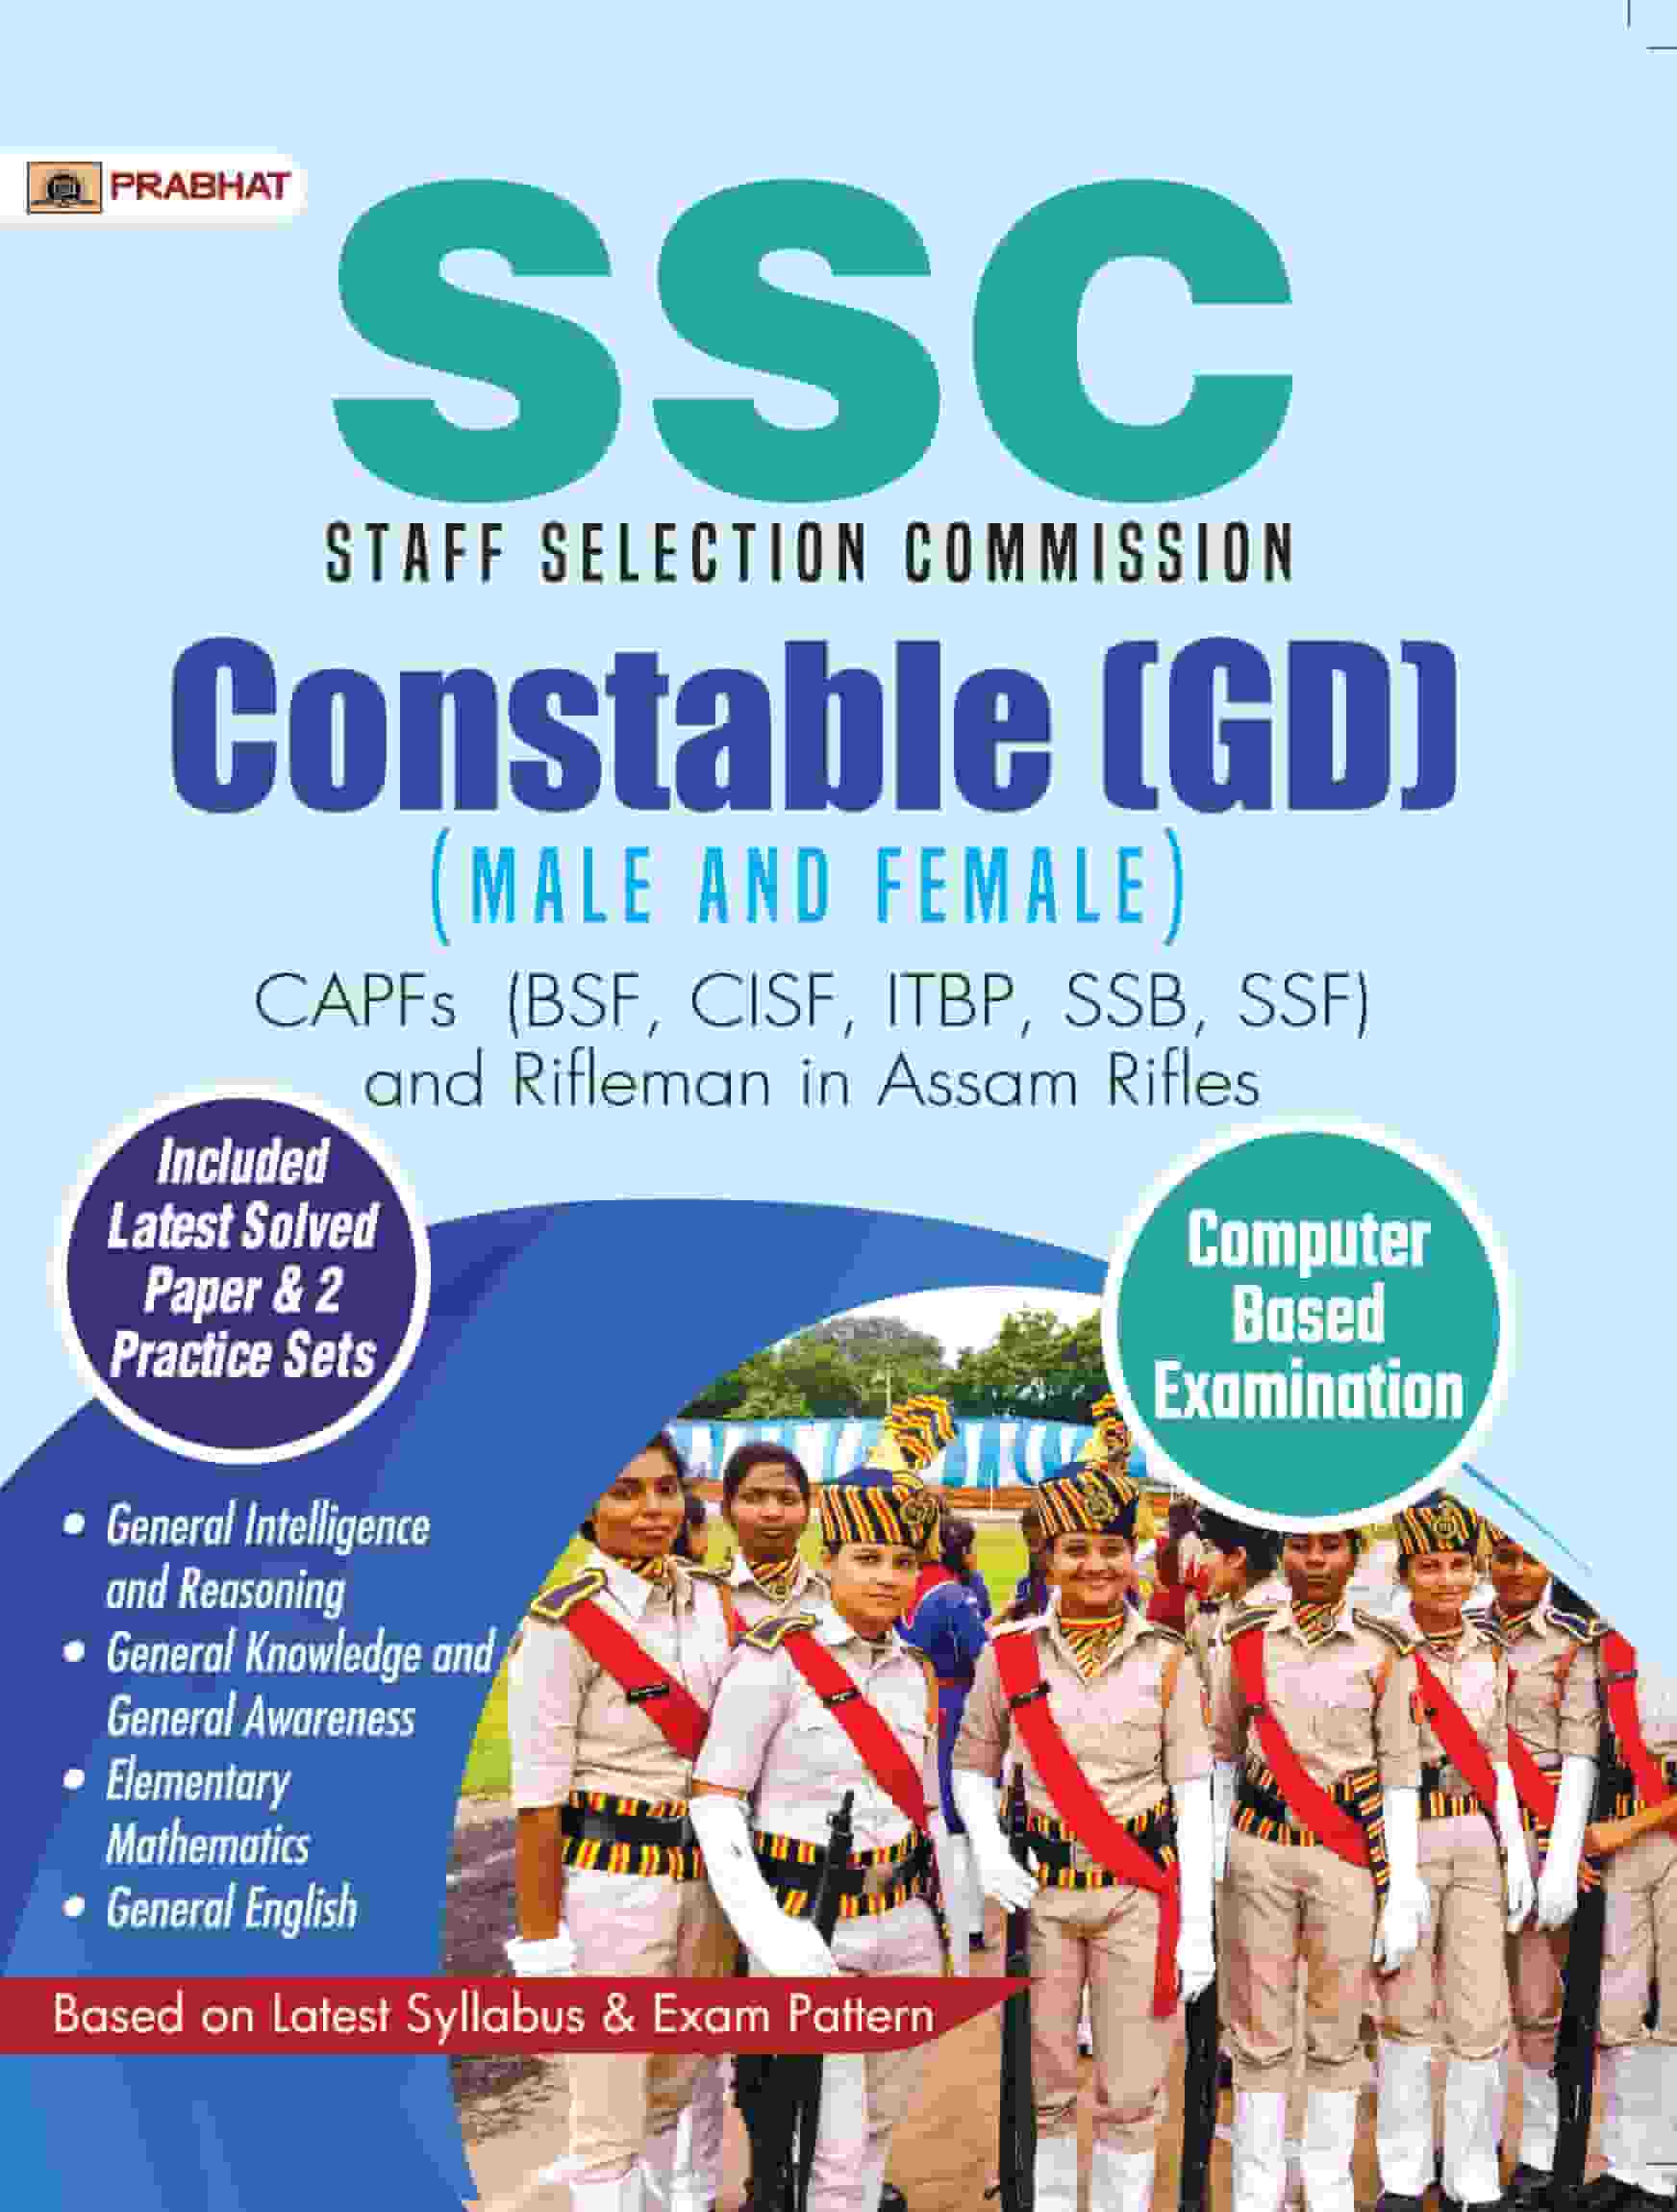 SSC Staff Selection Commission Constable (GD) (Male and Female) Comput... 